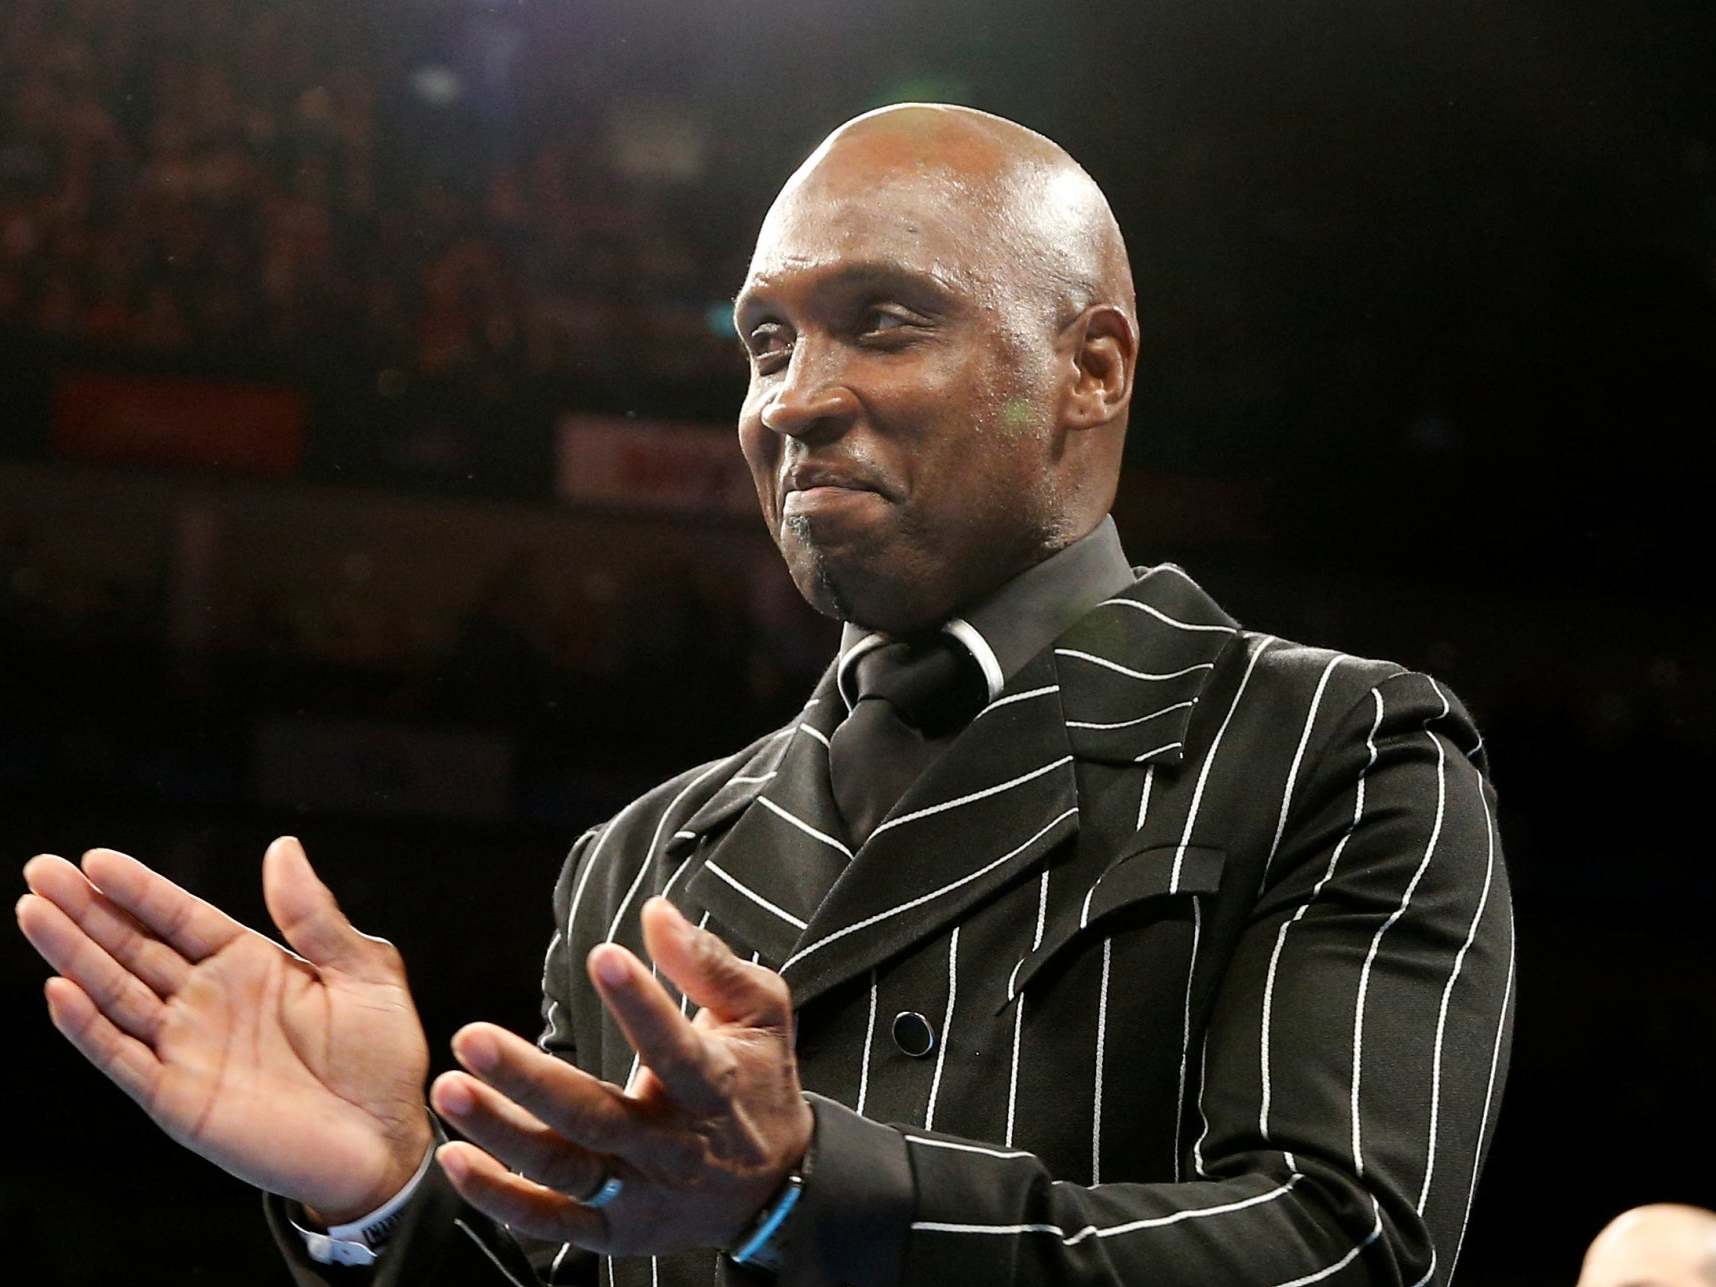 Nigel Benn will make a comeback to the ring 23 years after last fighting professionally